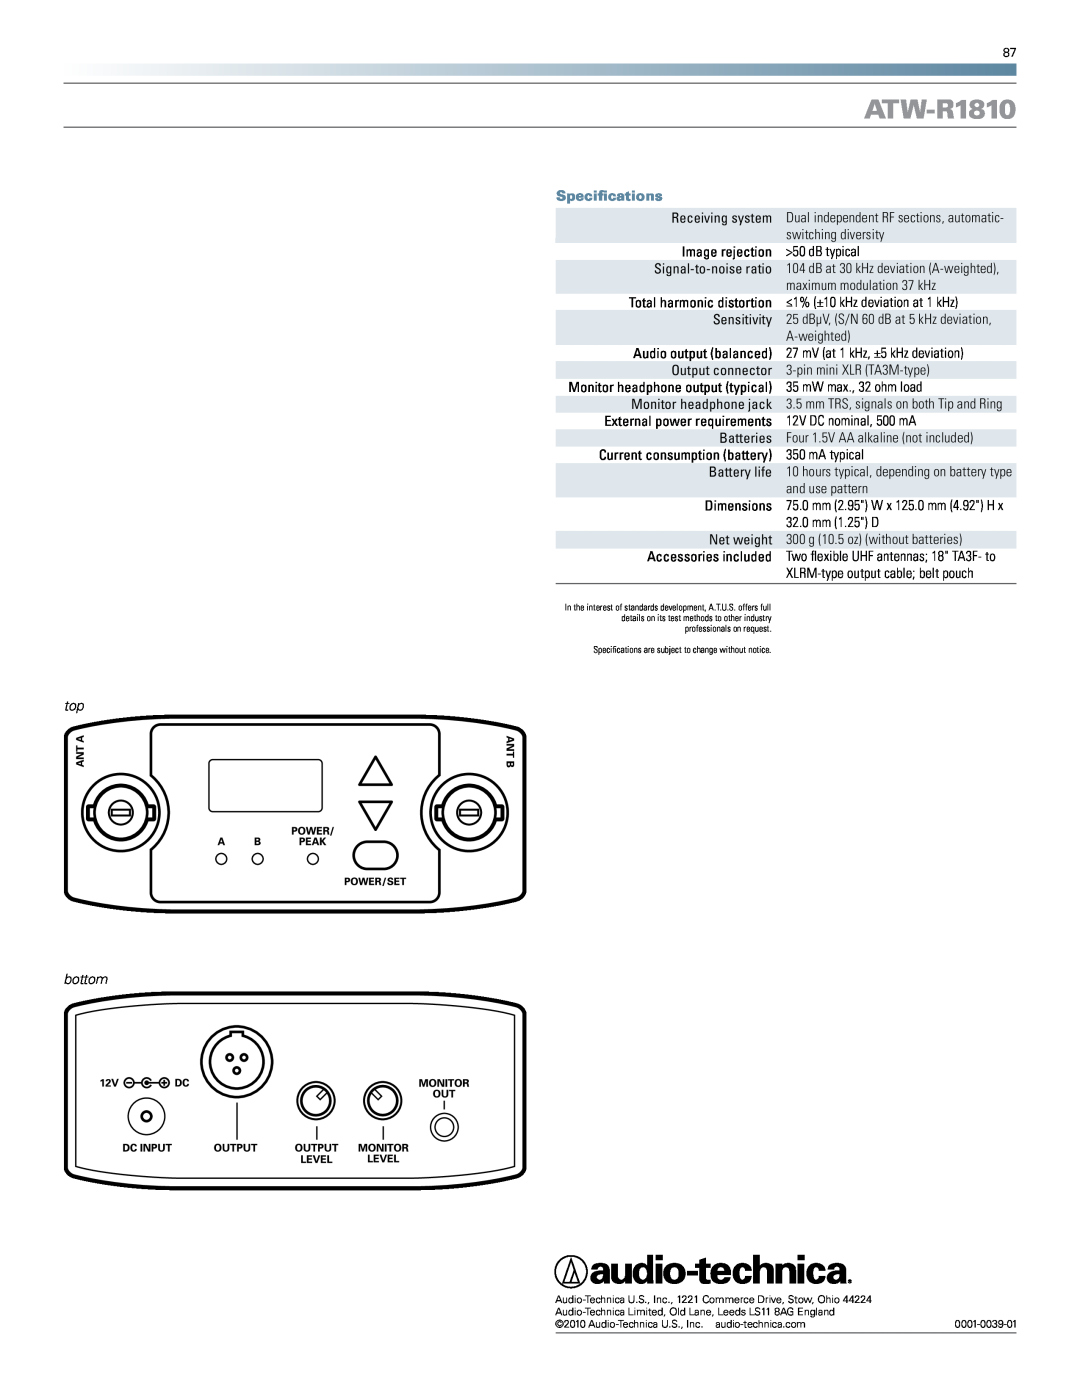 Audio-Technica ATW-R1810 manual Specifications, top bottom 